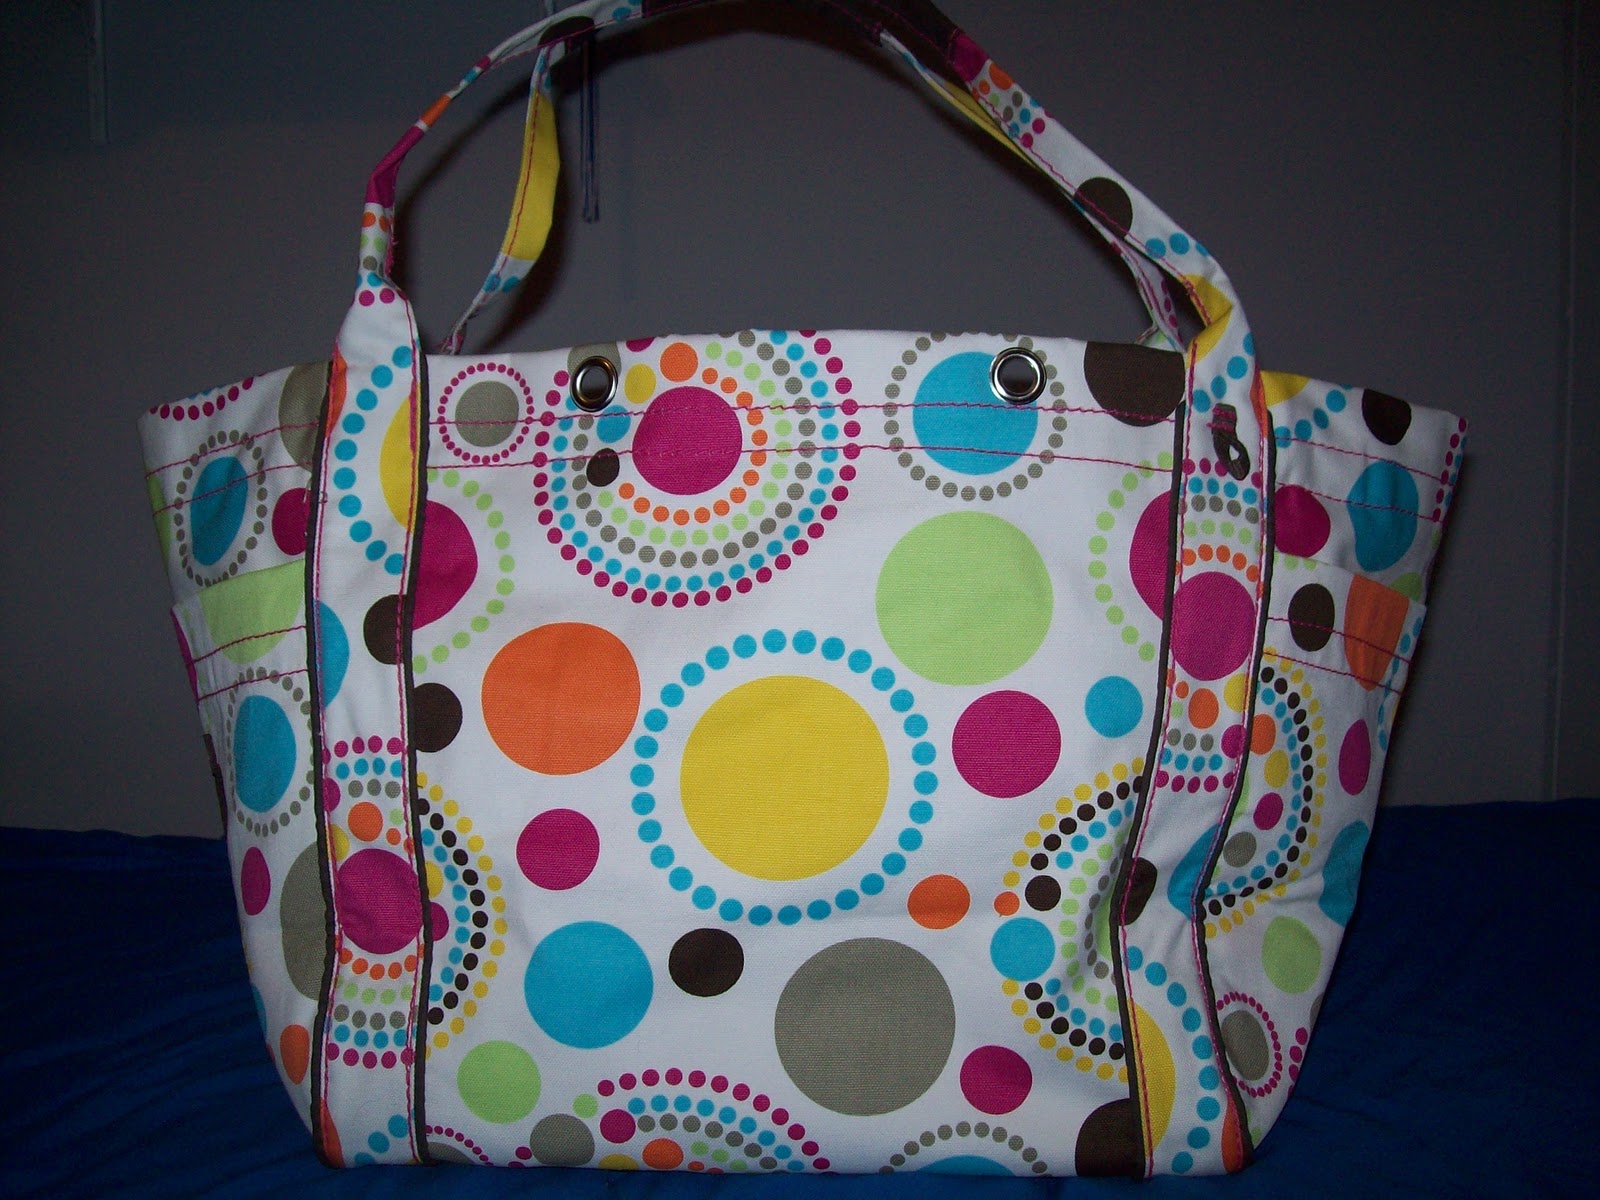 Thirty-One Gifts by Tootie